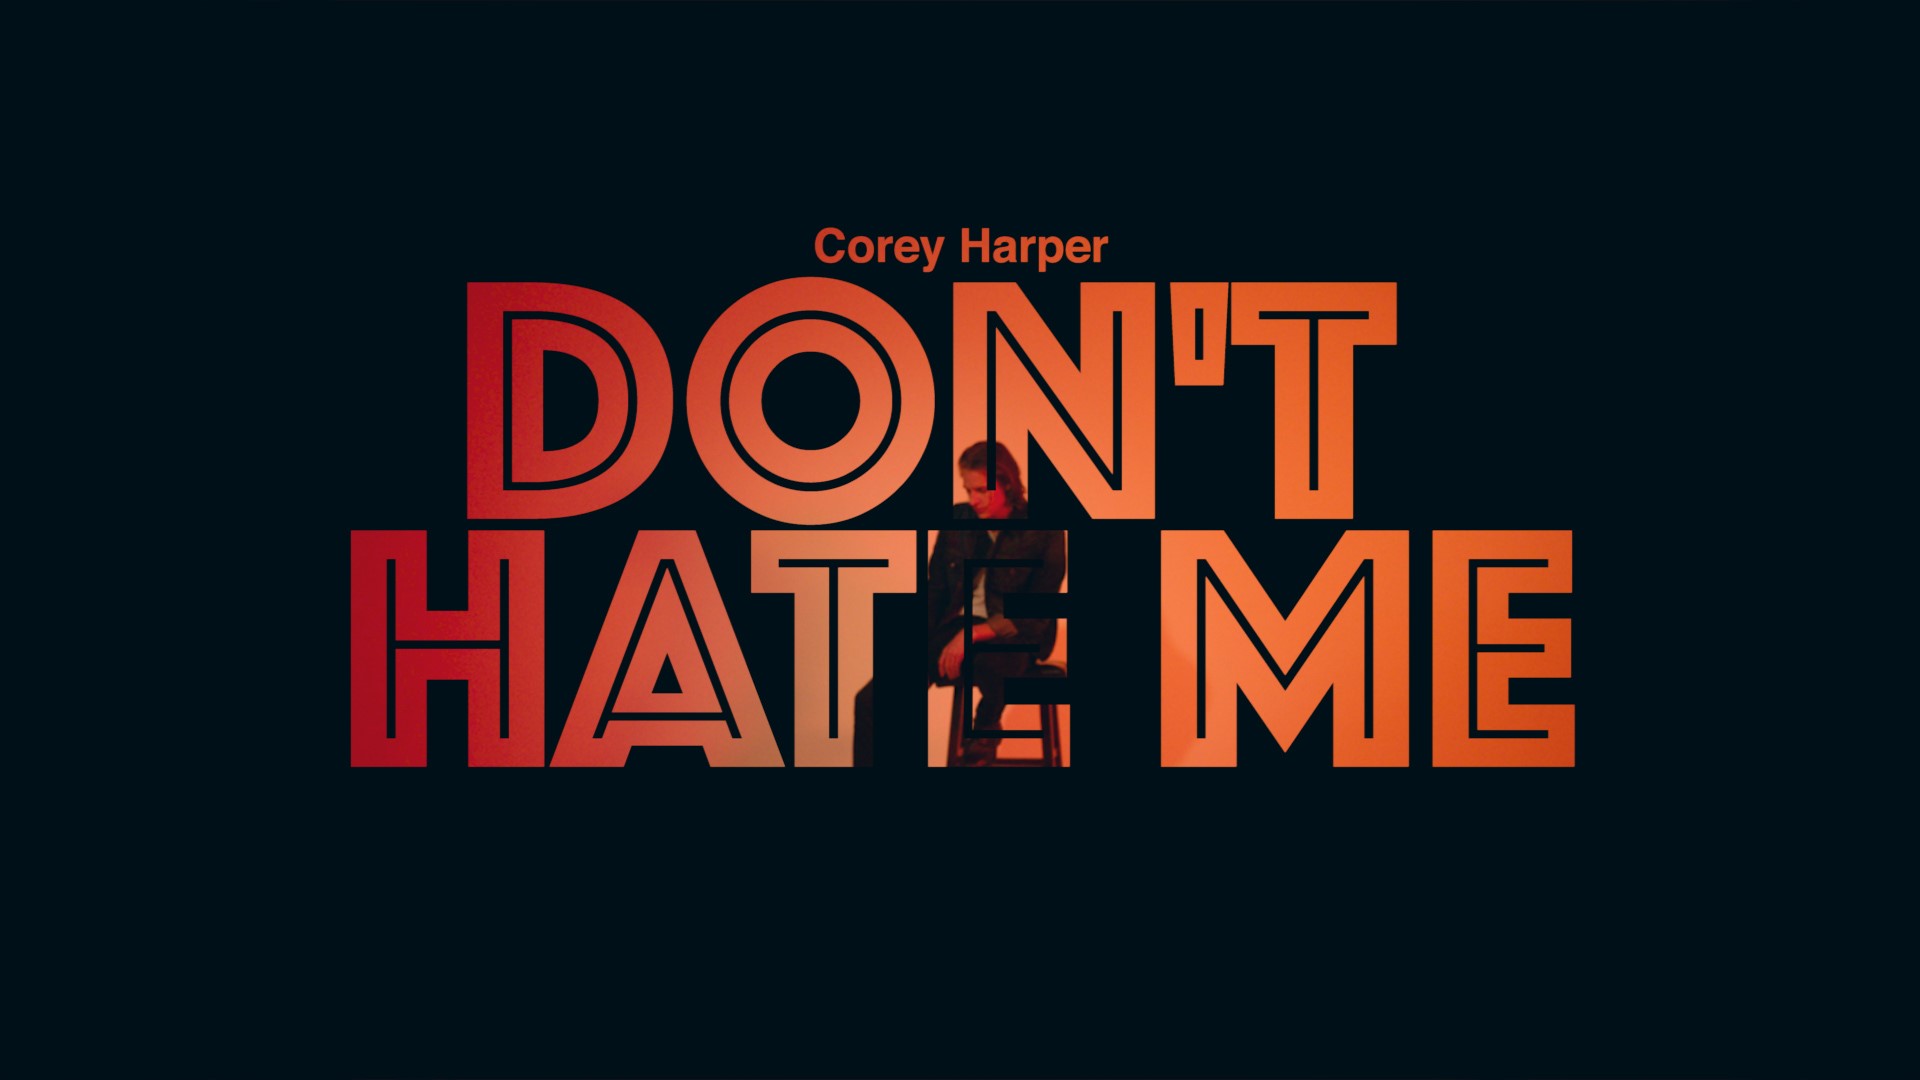 "Don't Hate Me" by Corey Harper © 2019